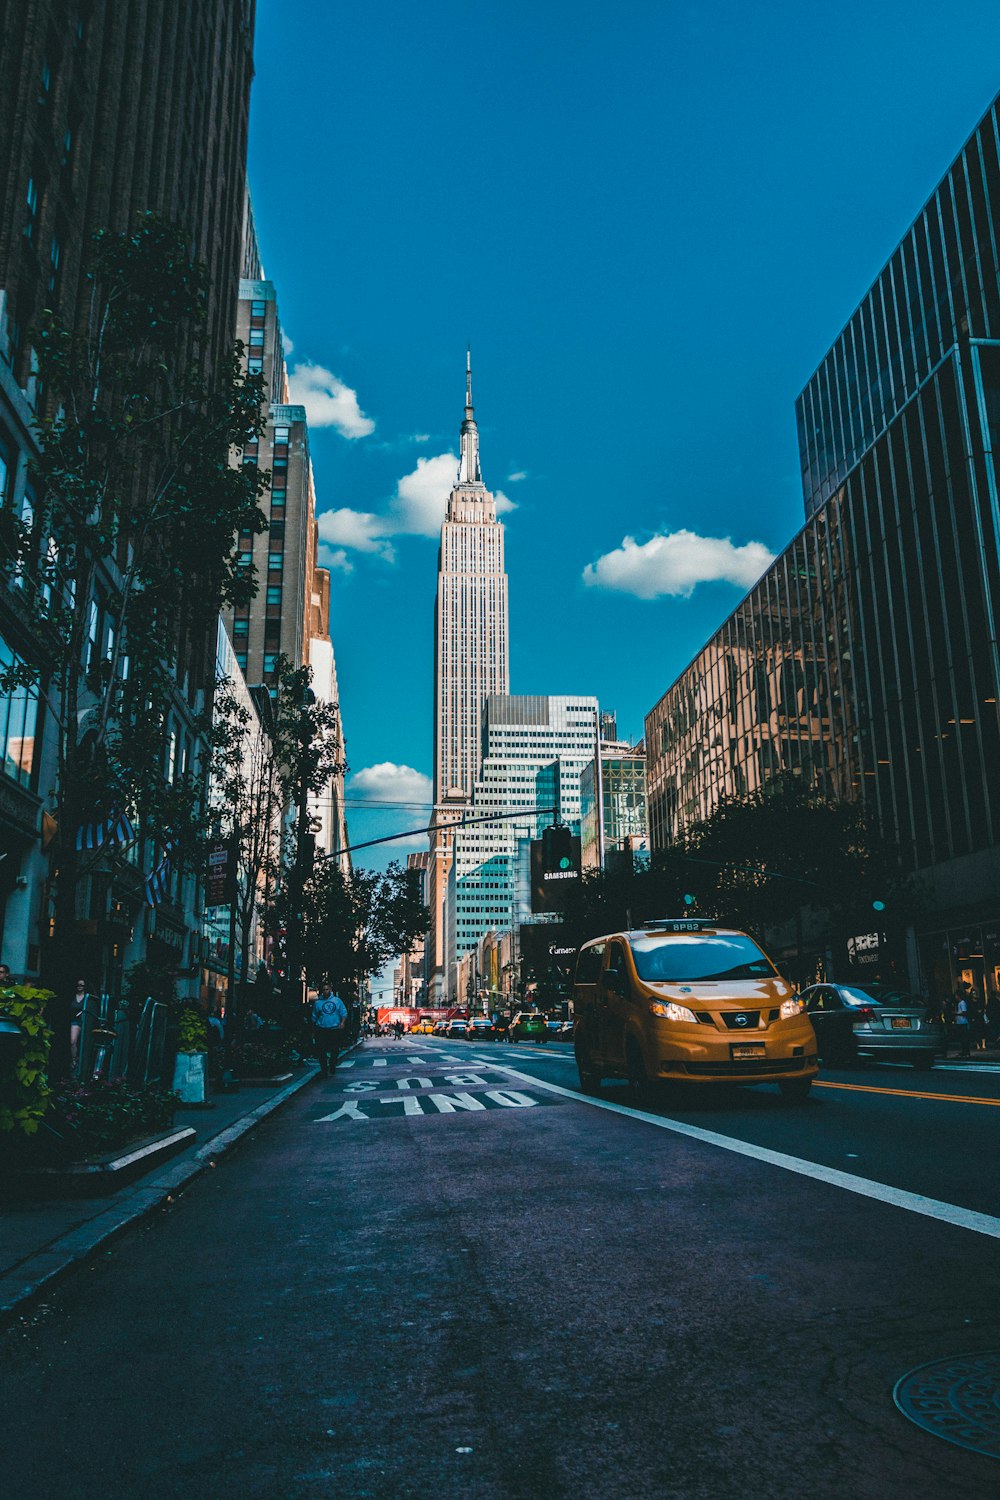 photo of Empire State Building in New York city